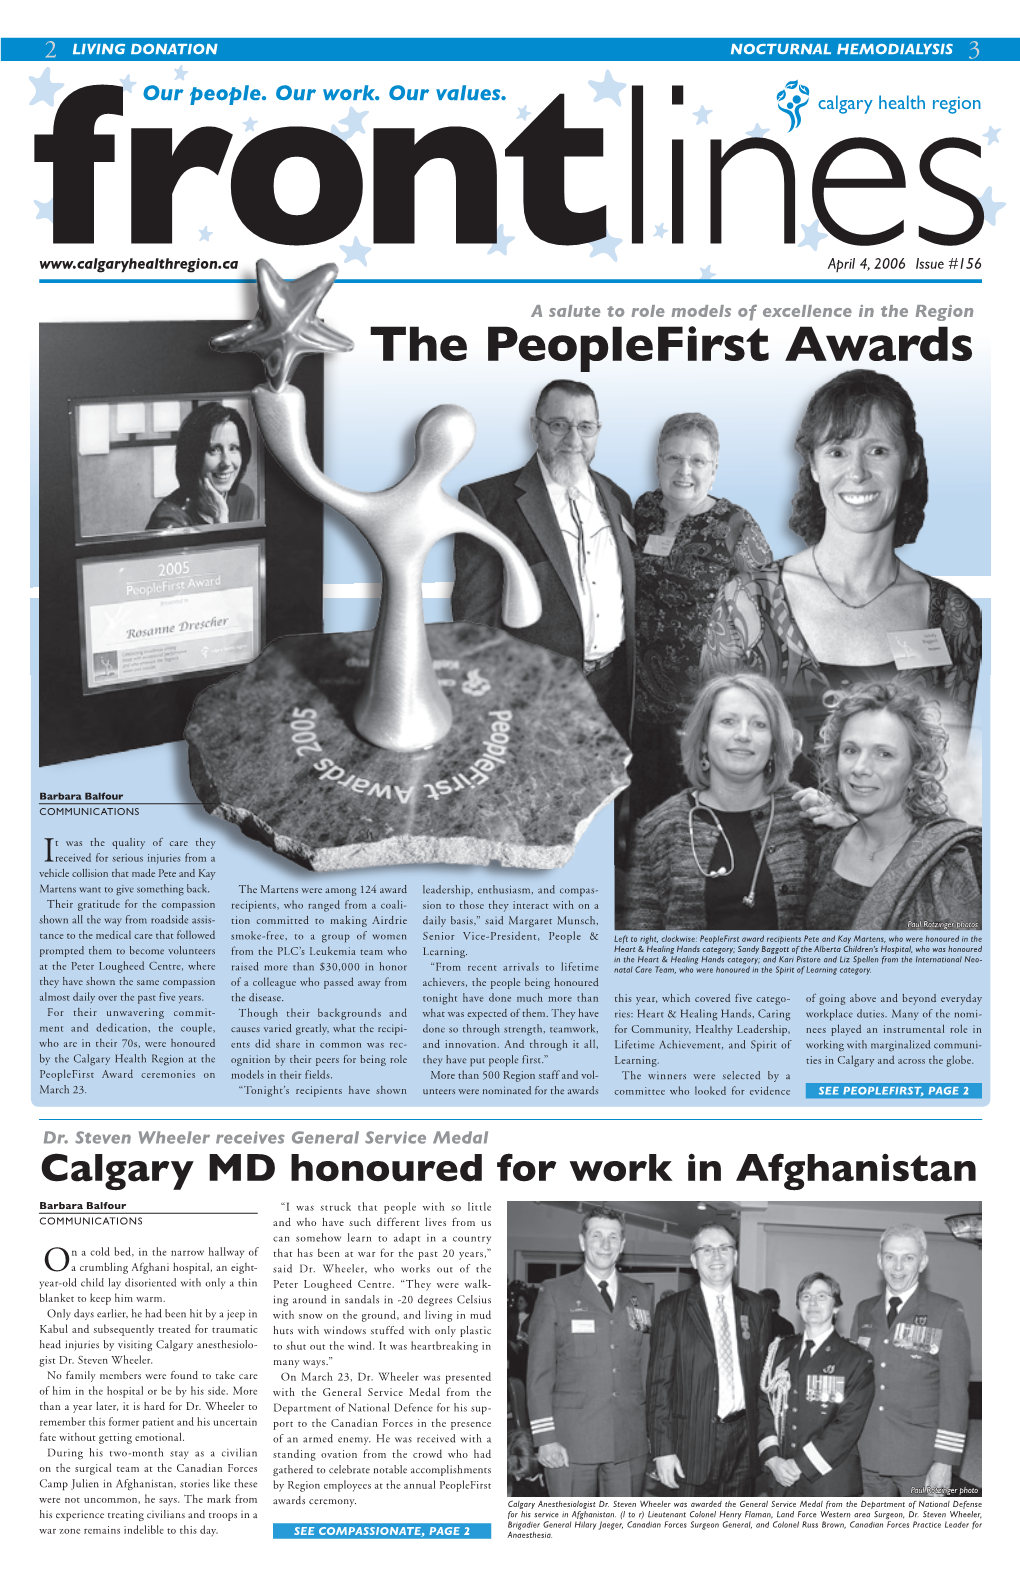 The Peoplefirst Awards